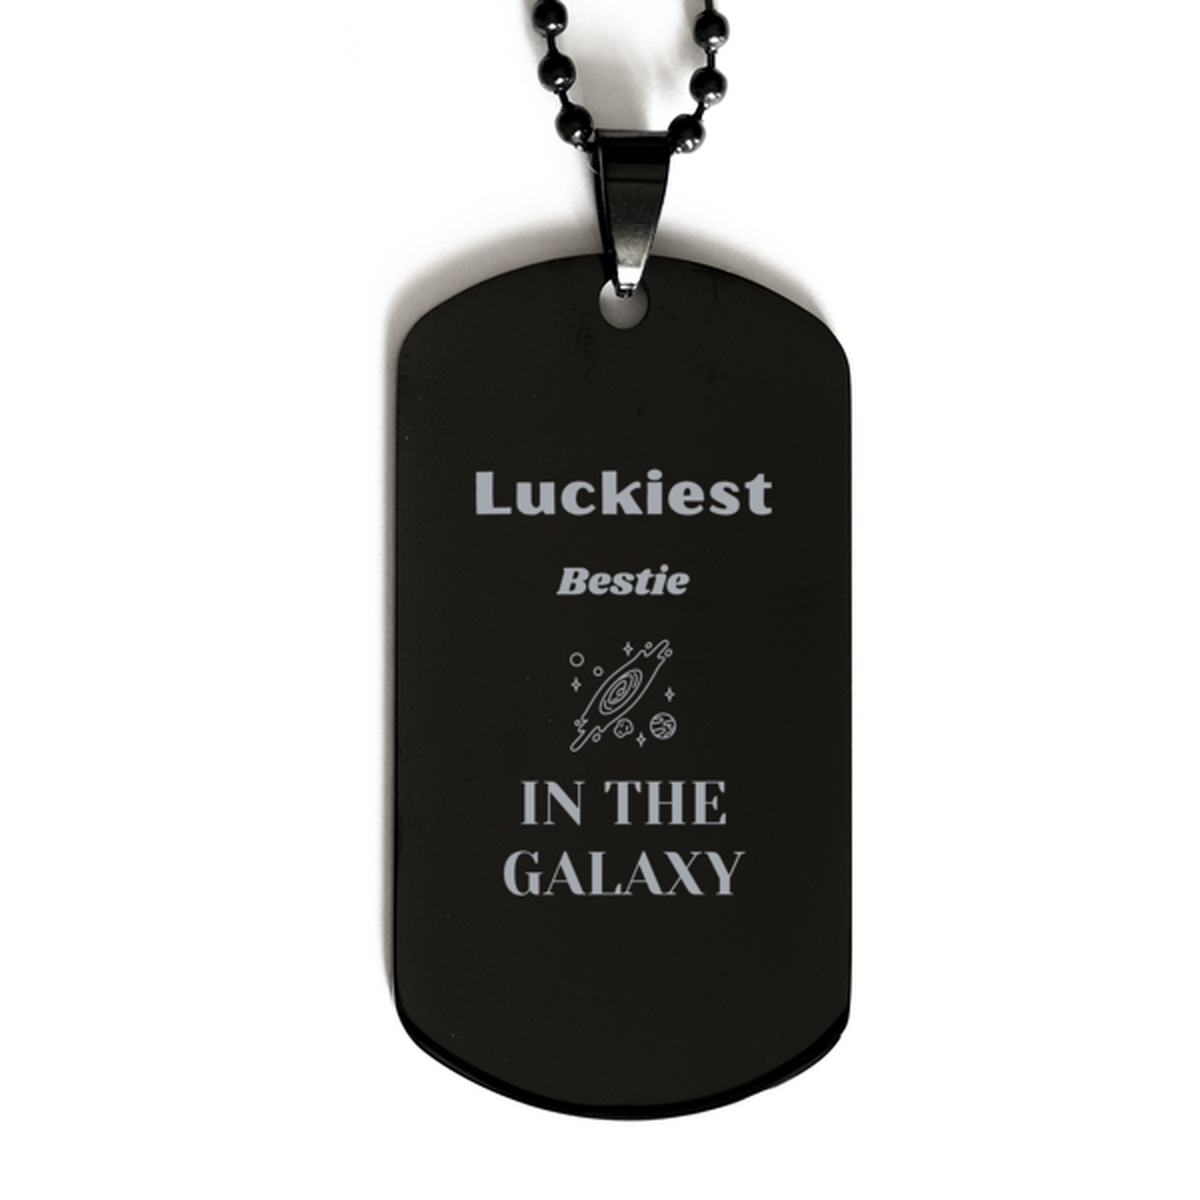 Luckiest Bestie in the Galaxy, To My Bestie Engraved Gifts, Christmas Bestie Black Dog Tag Gifts, X-mas Birthday Unique Gifts For Bestie Men Women